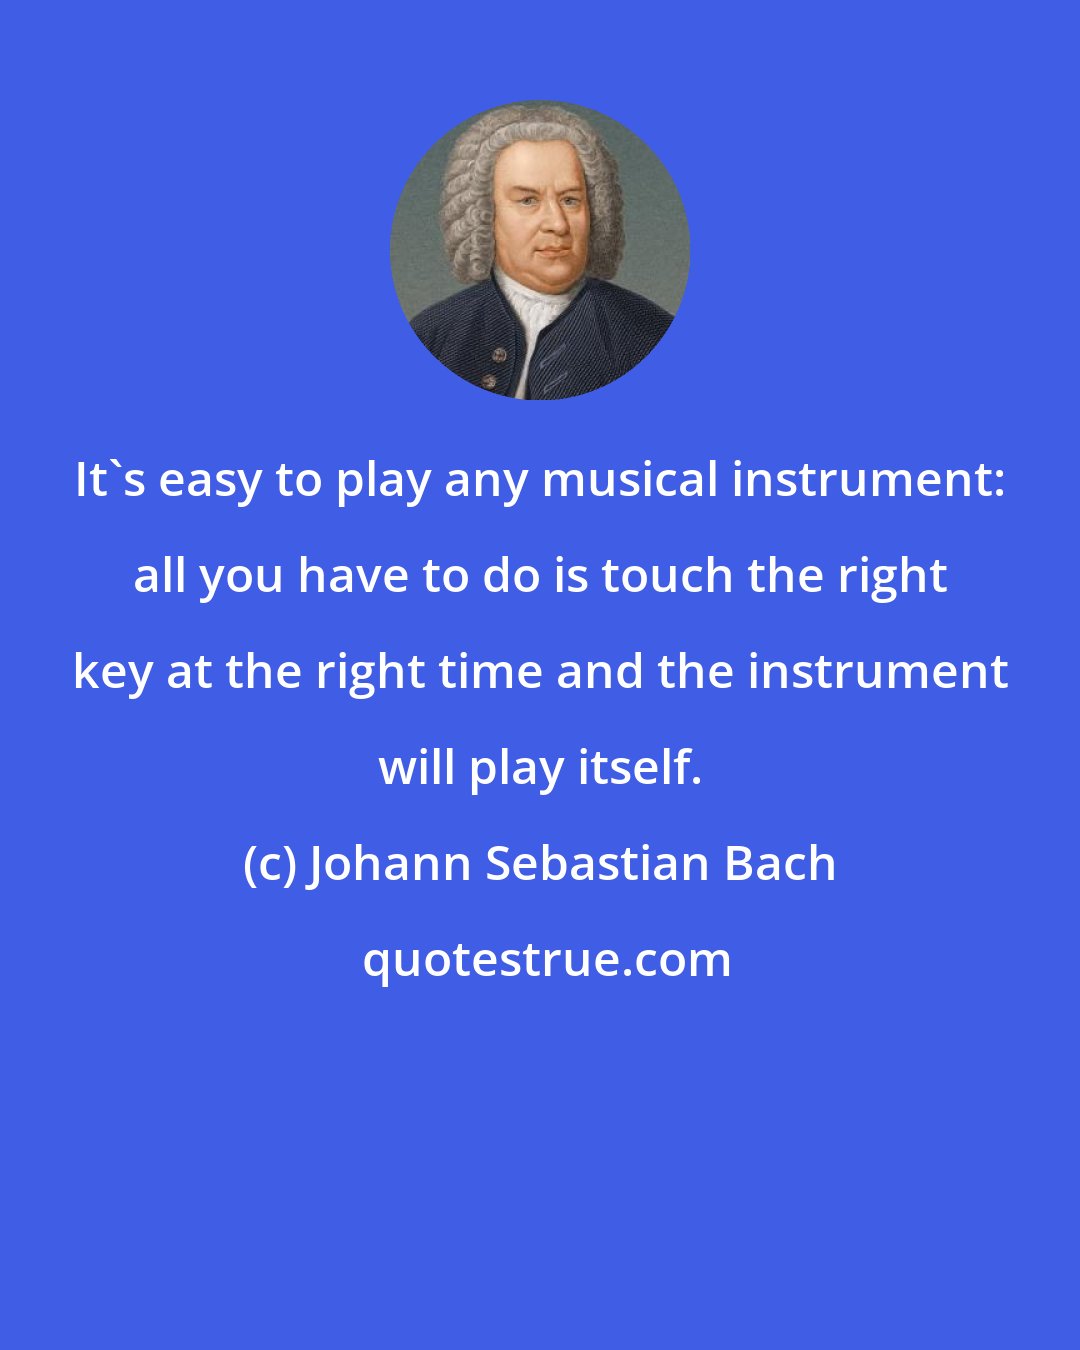 Johann Sebastian Bach: It's easy to play any musical instrument: all you have to do is touch the right key at the right time and the instrument will play itself.